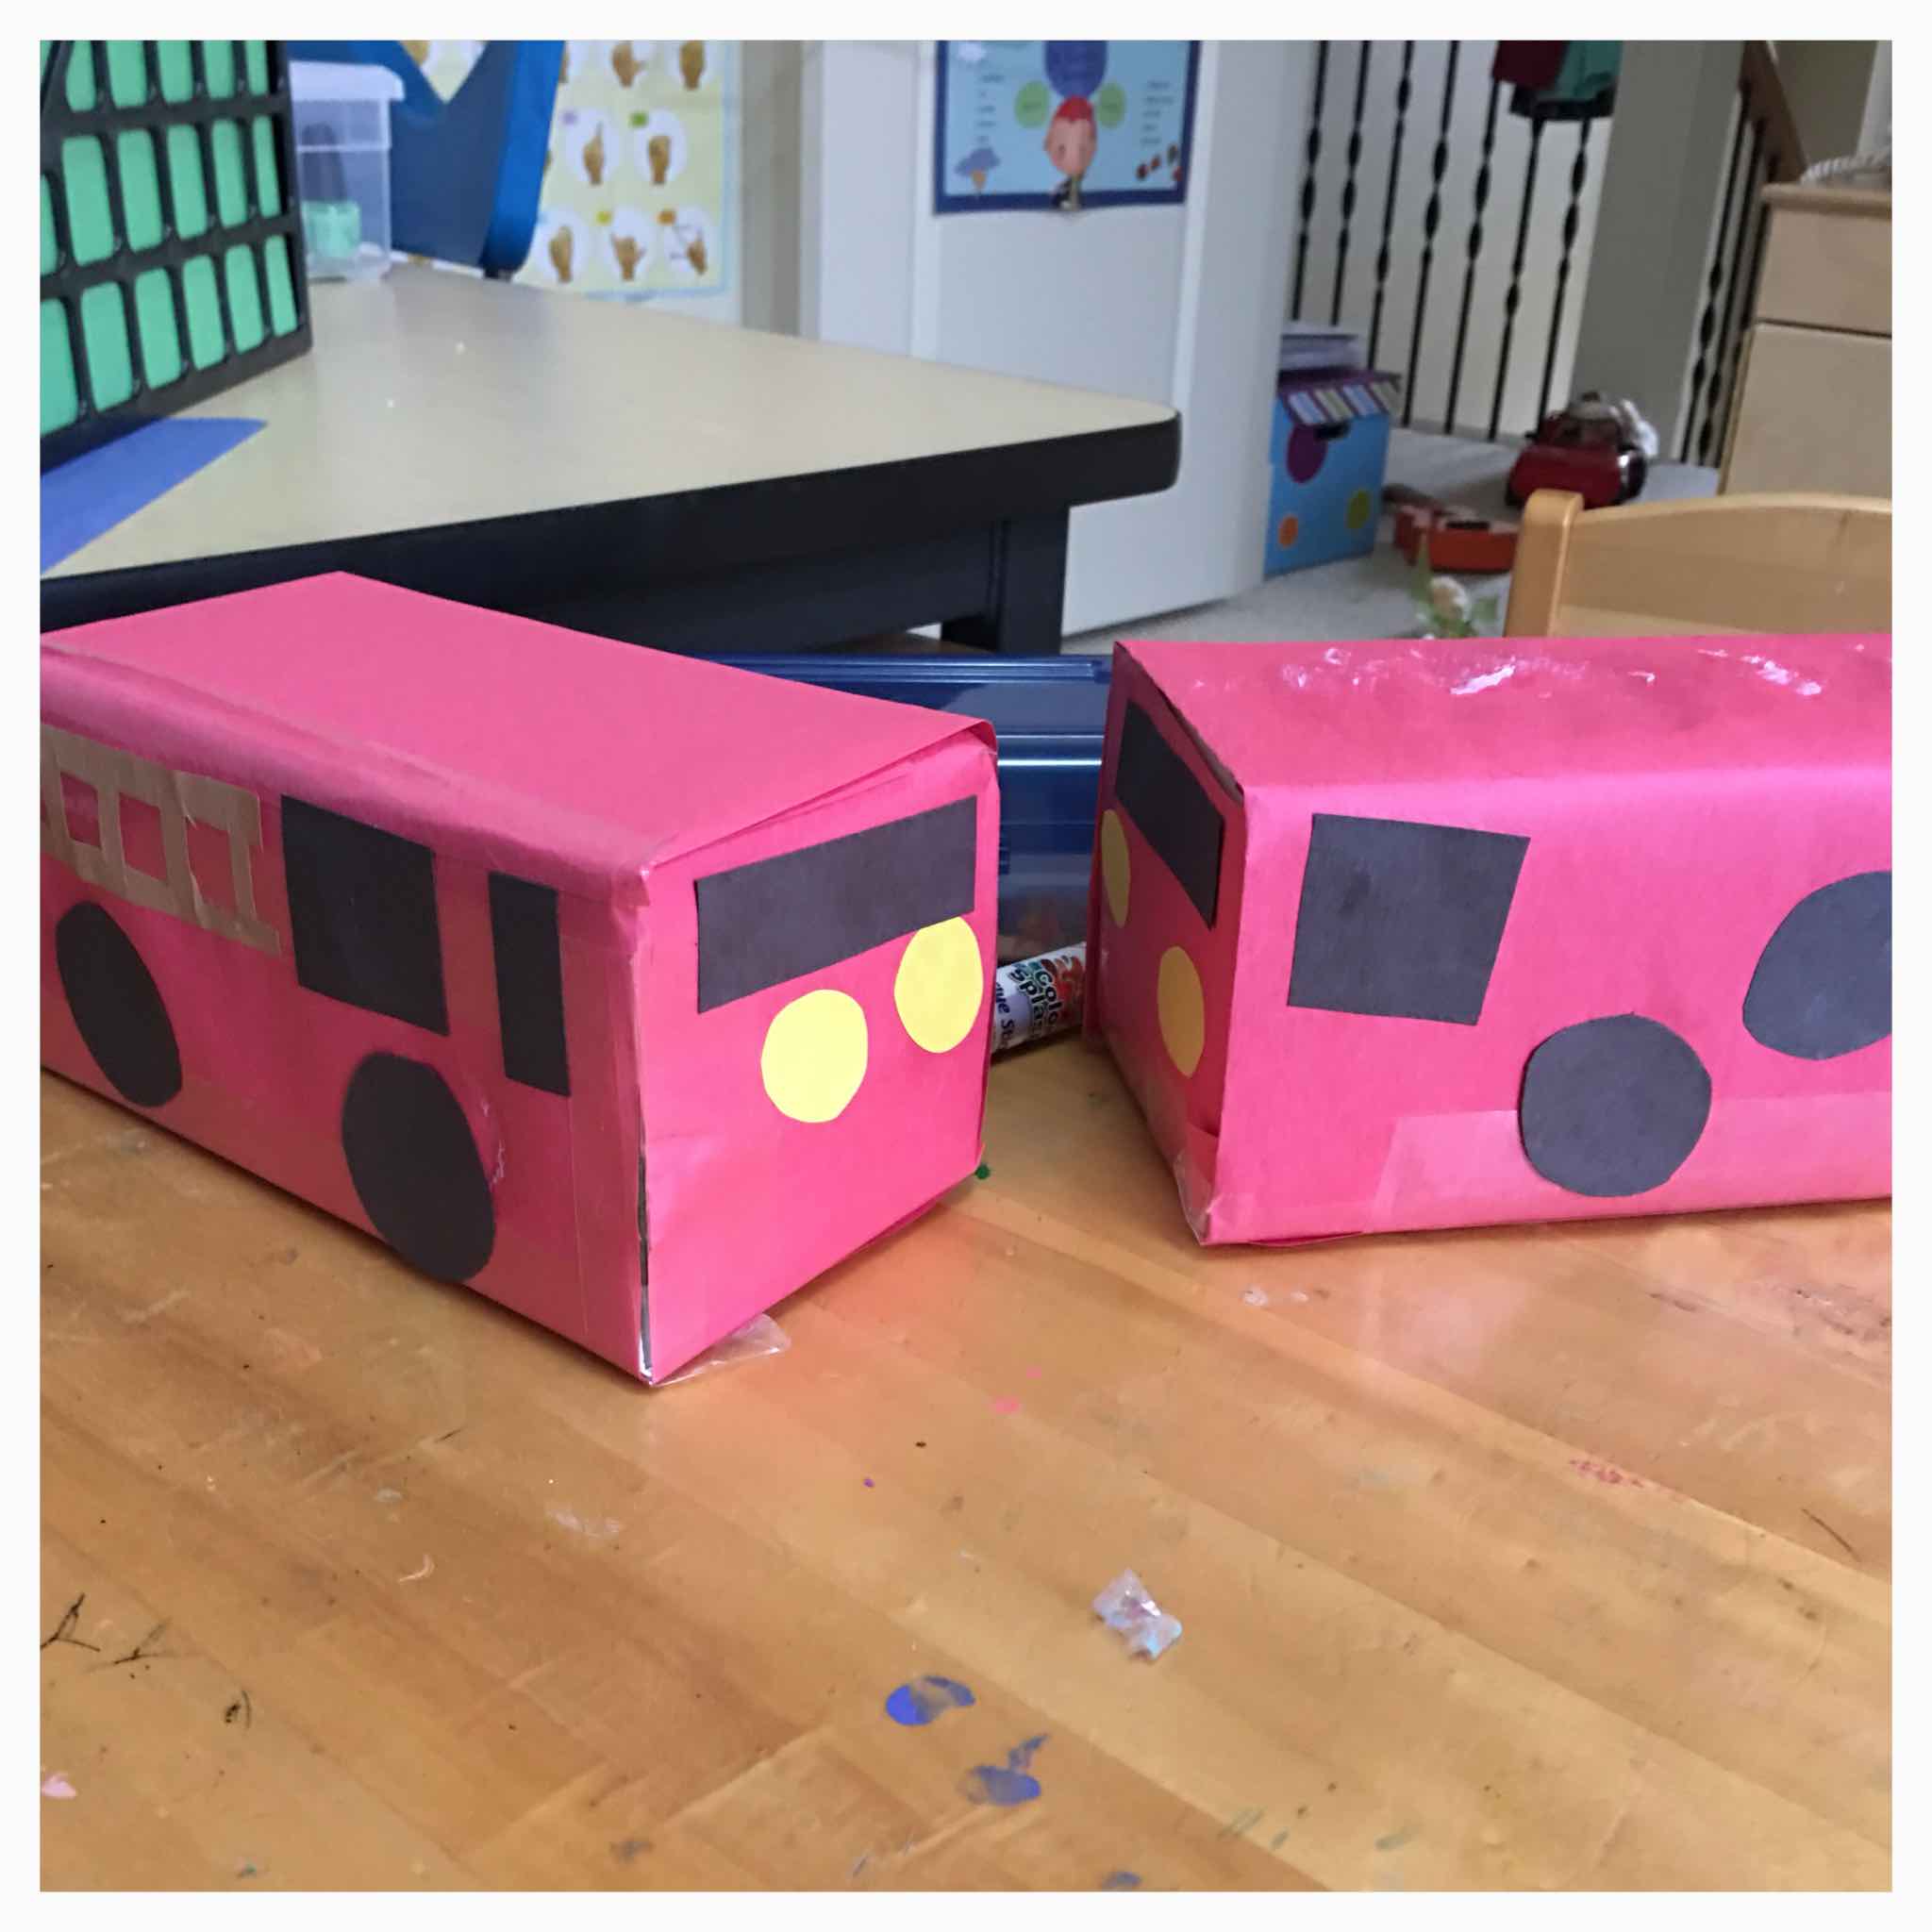 Fire Safety Week: learning about fire fighters and fire safety. Here's a simple DIY box fire truck the children can create to play with.